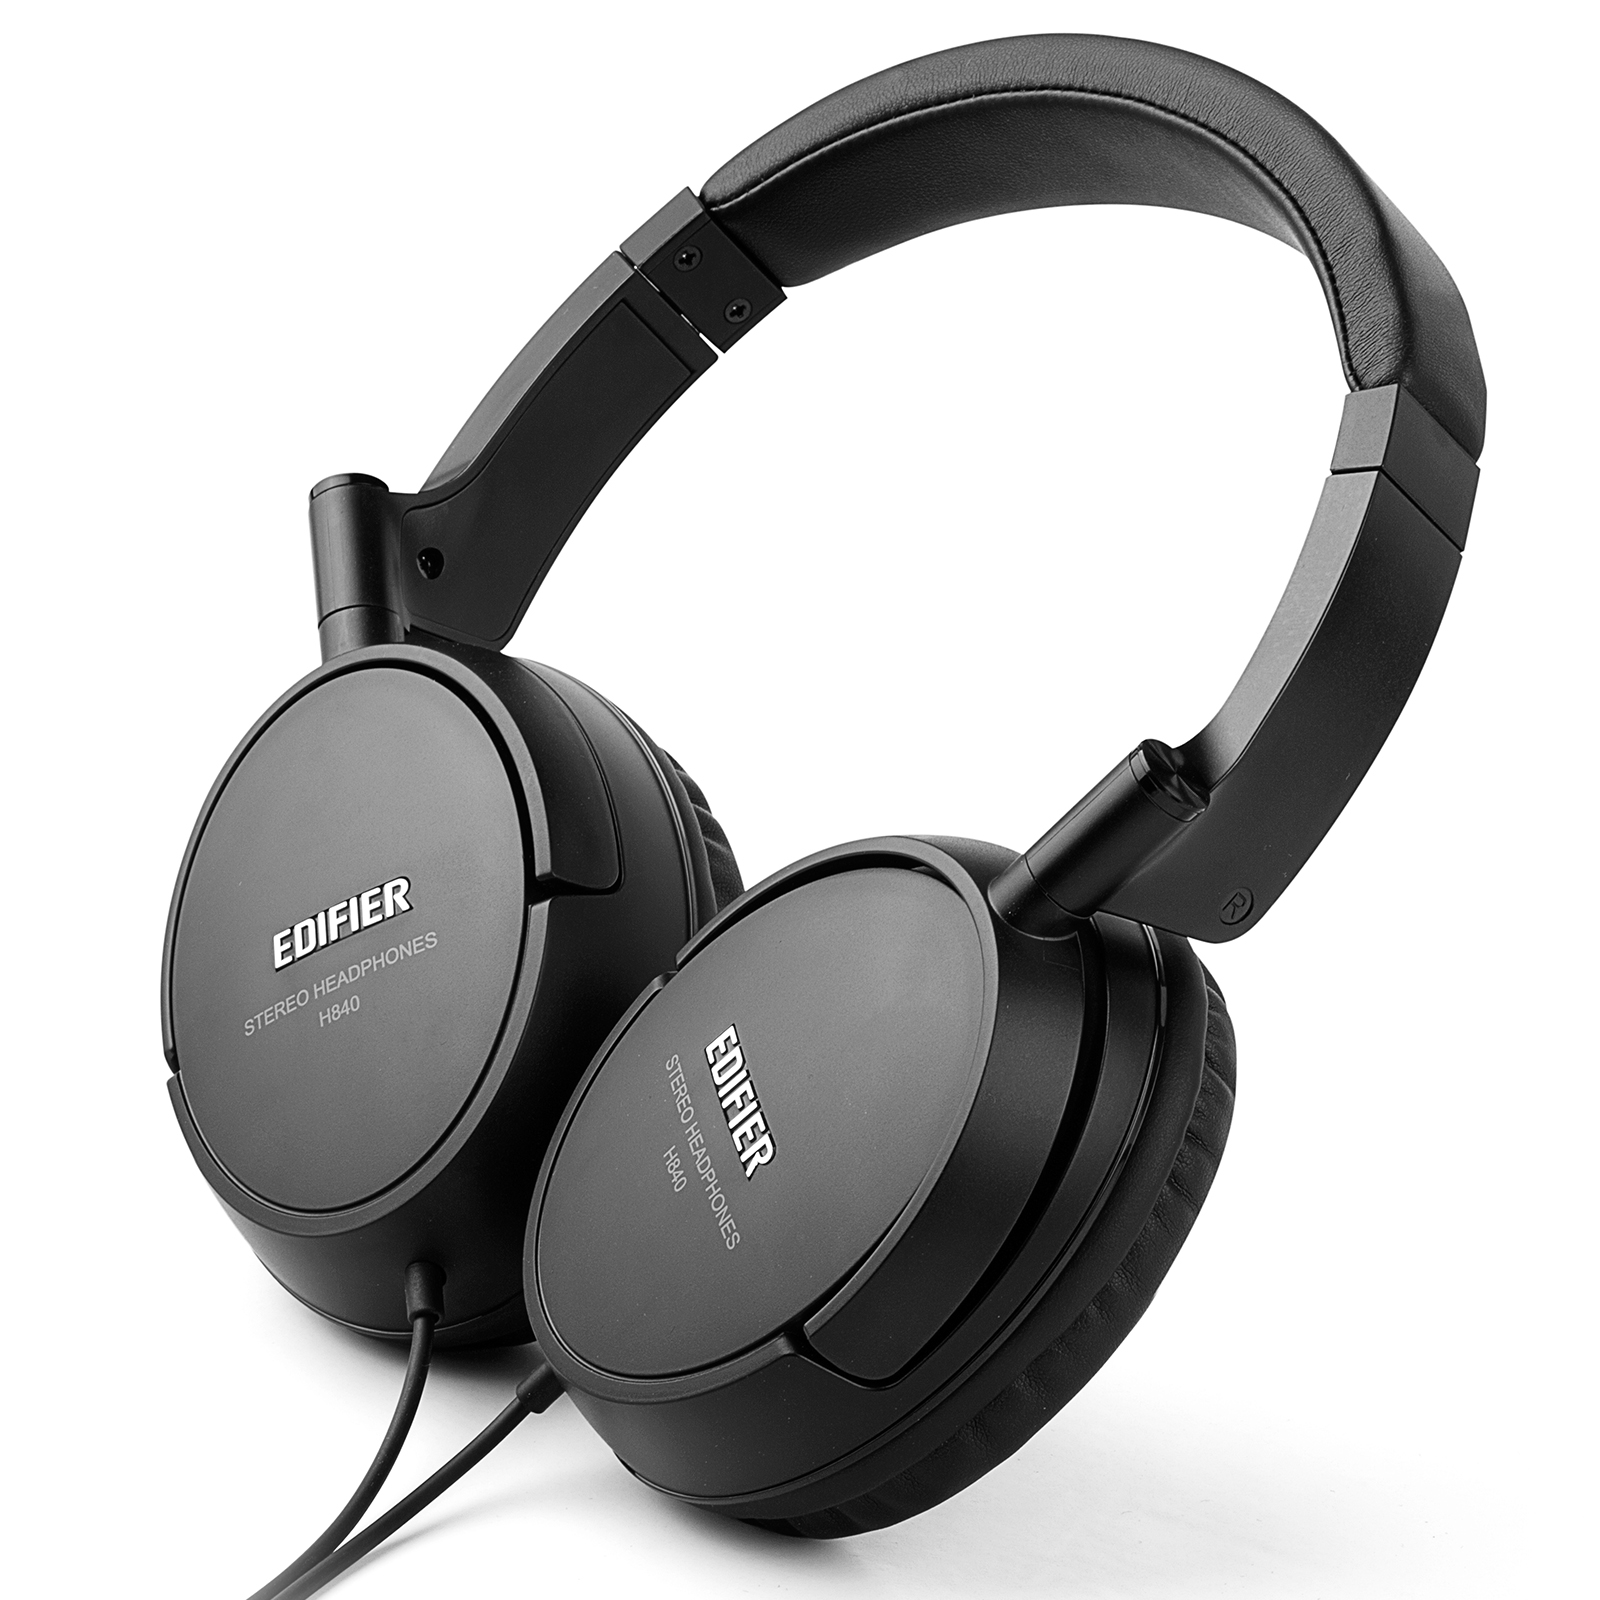 Edifier H840 Audiophile Over-the-ear Noise-Isolating Headphones - Black - image 2 of 7